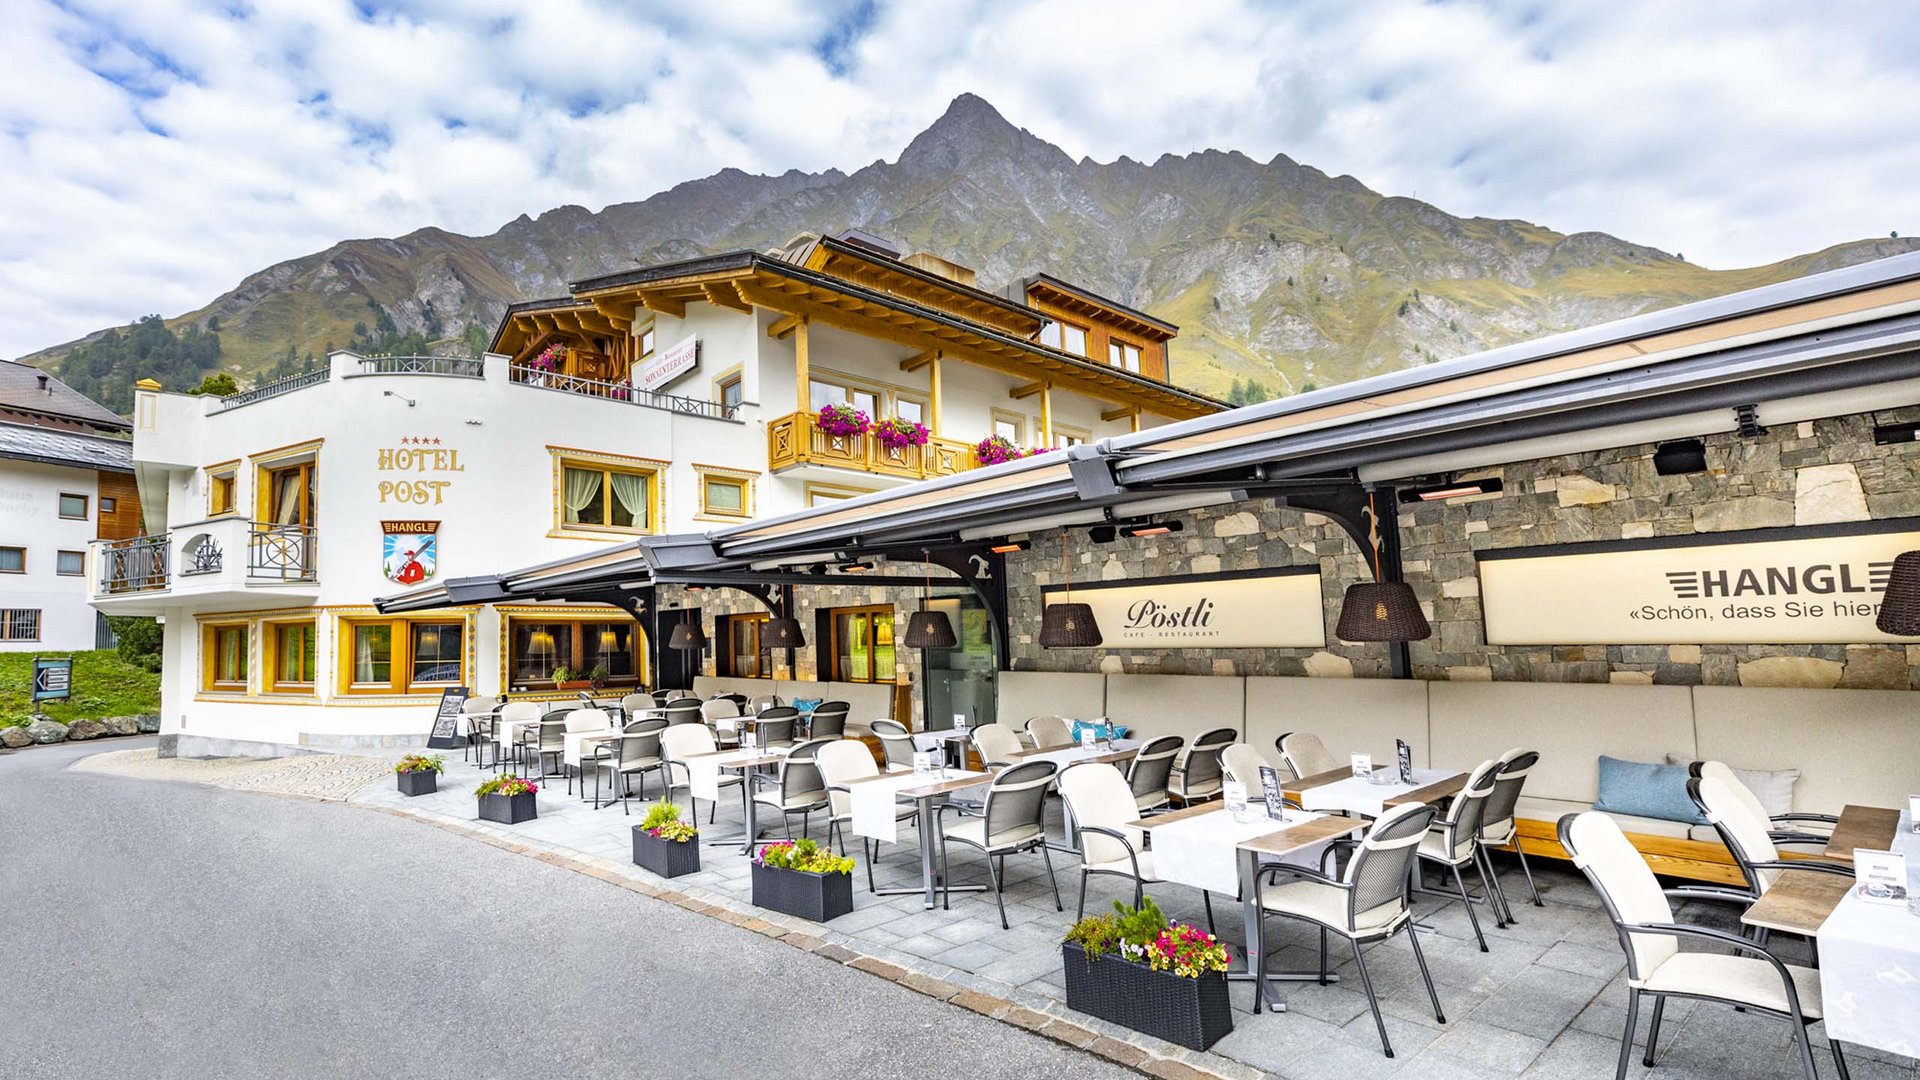 Relax on the terrace after the best hikes in Switzerland